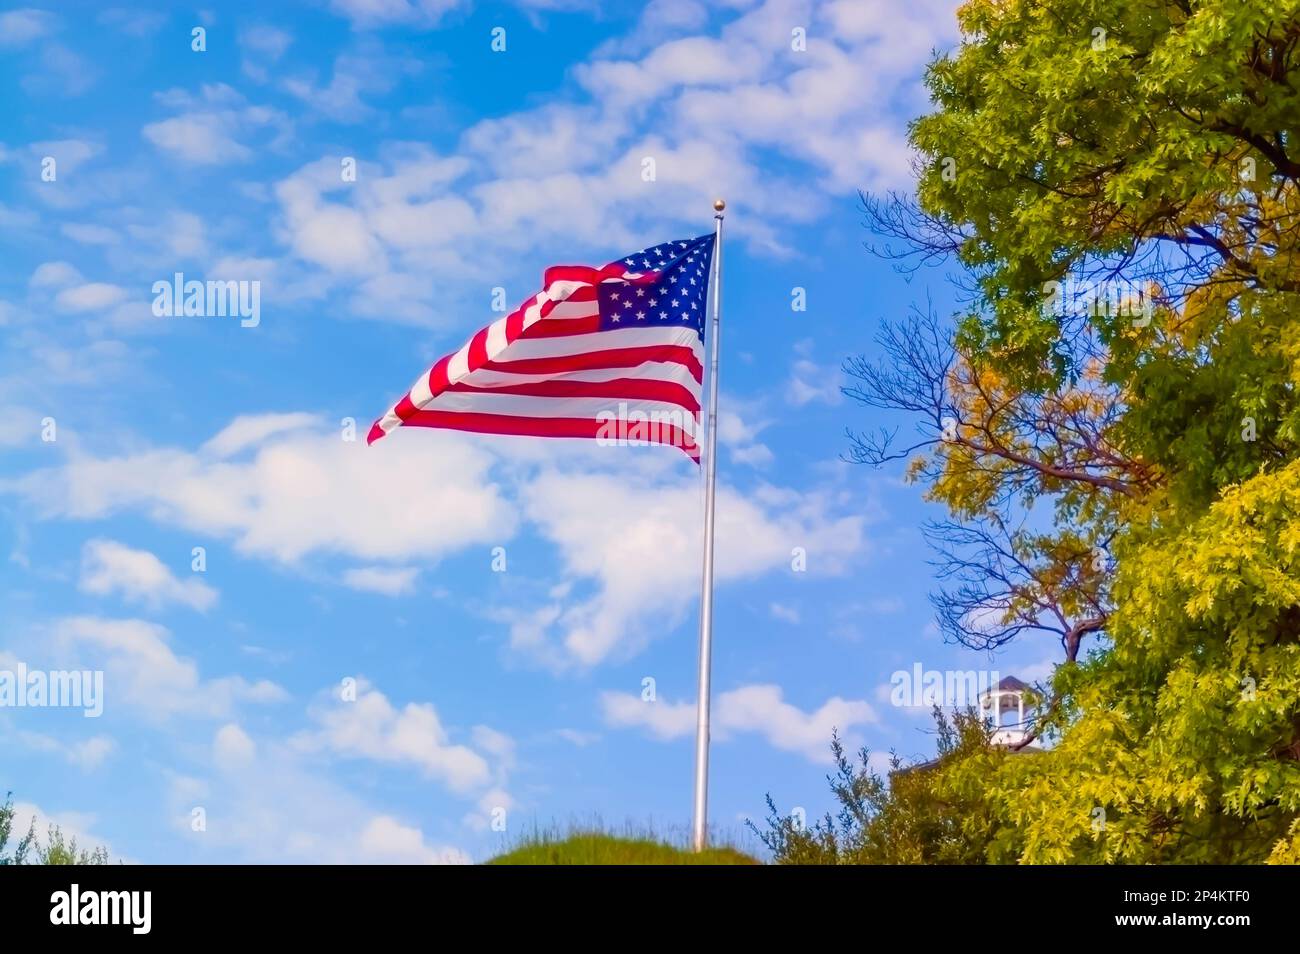 The American flag, star and stripes, fluttering in the wind on a summer morning. Stock Photo